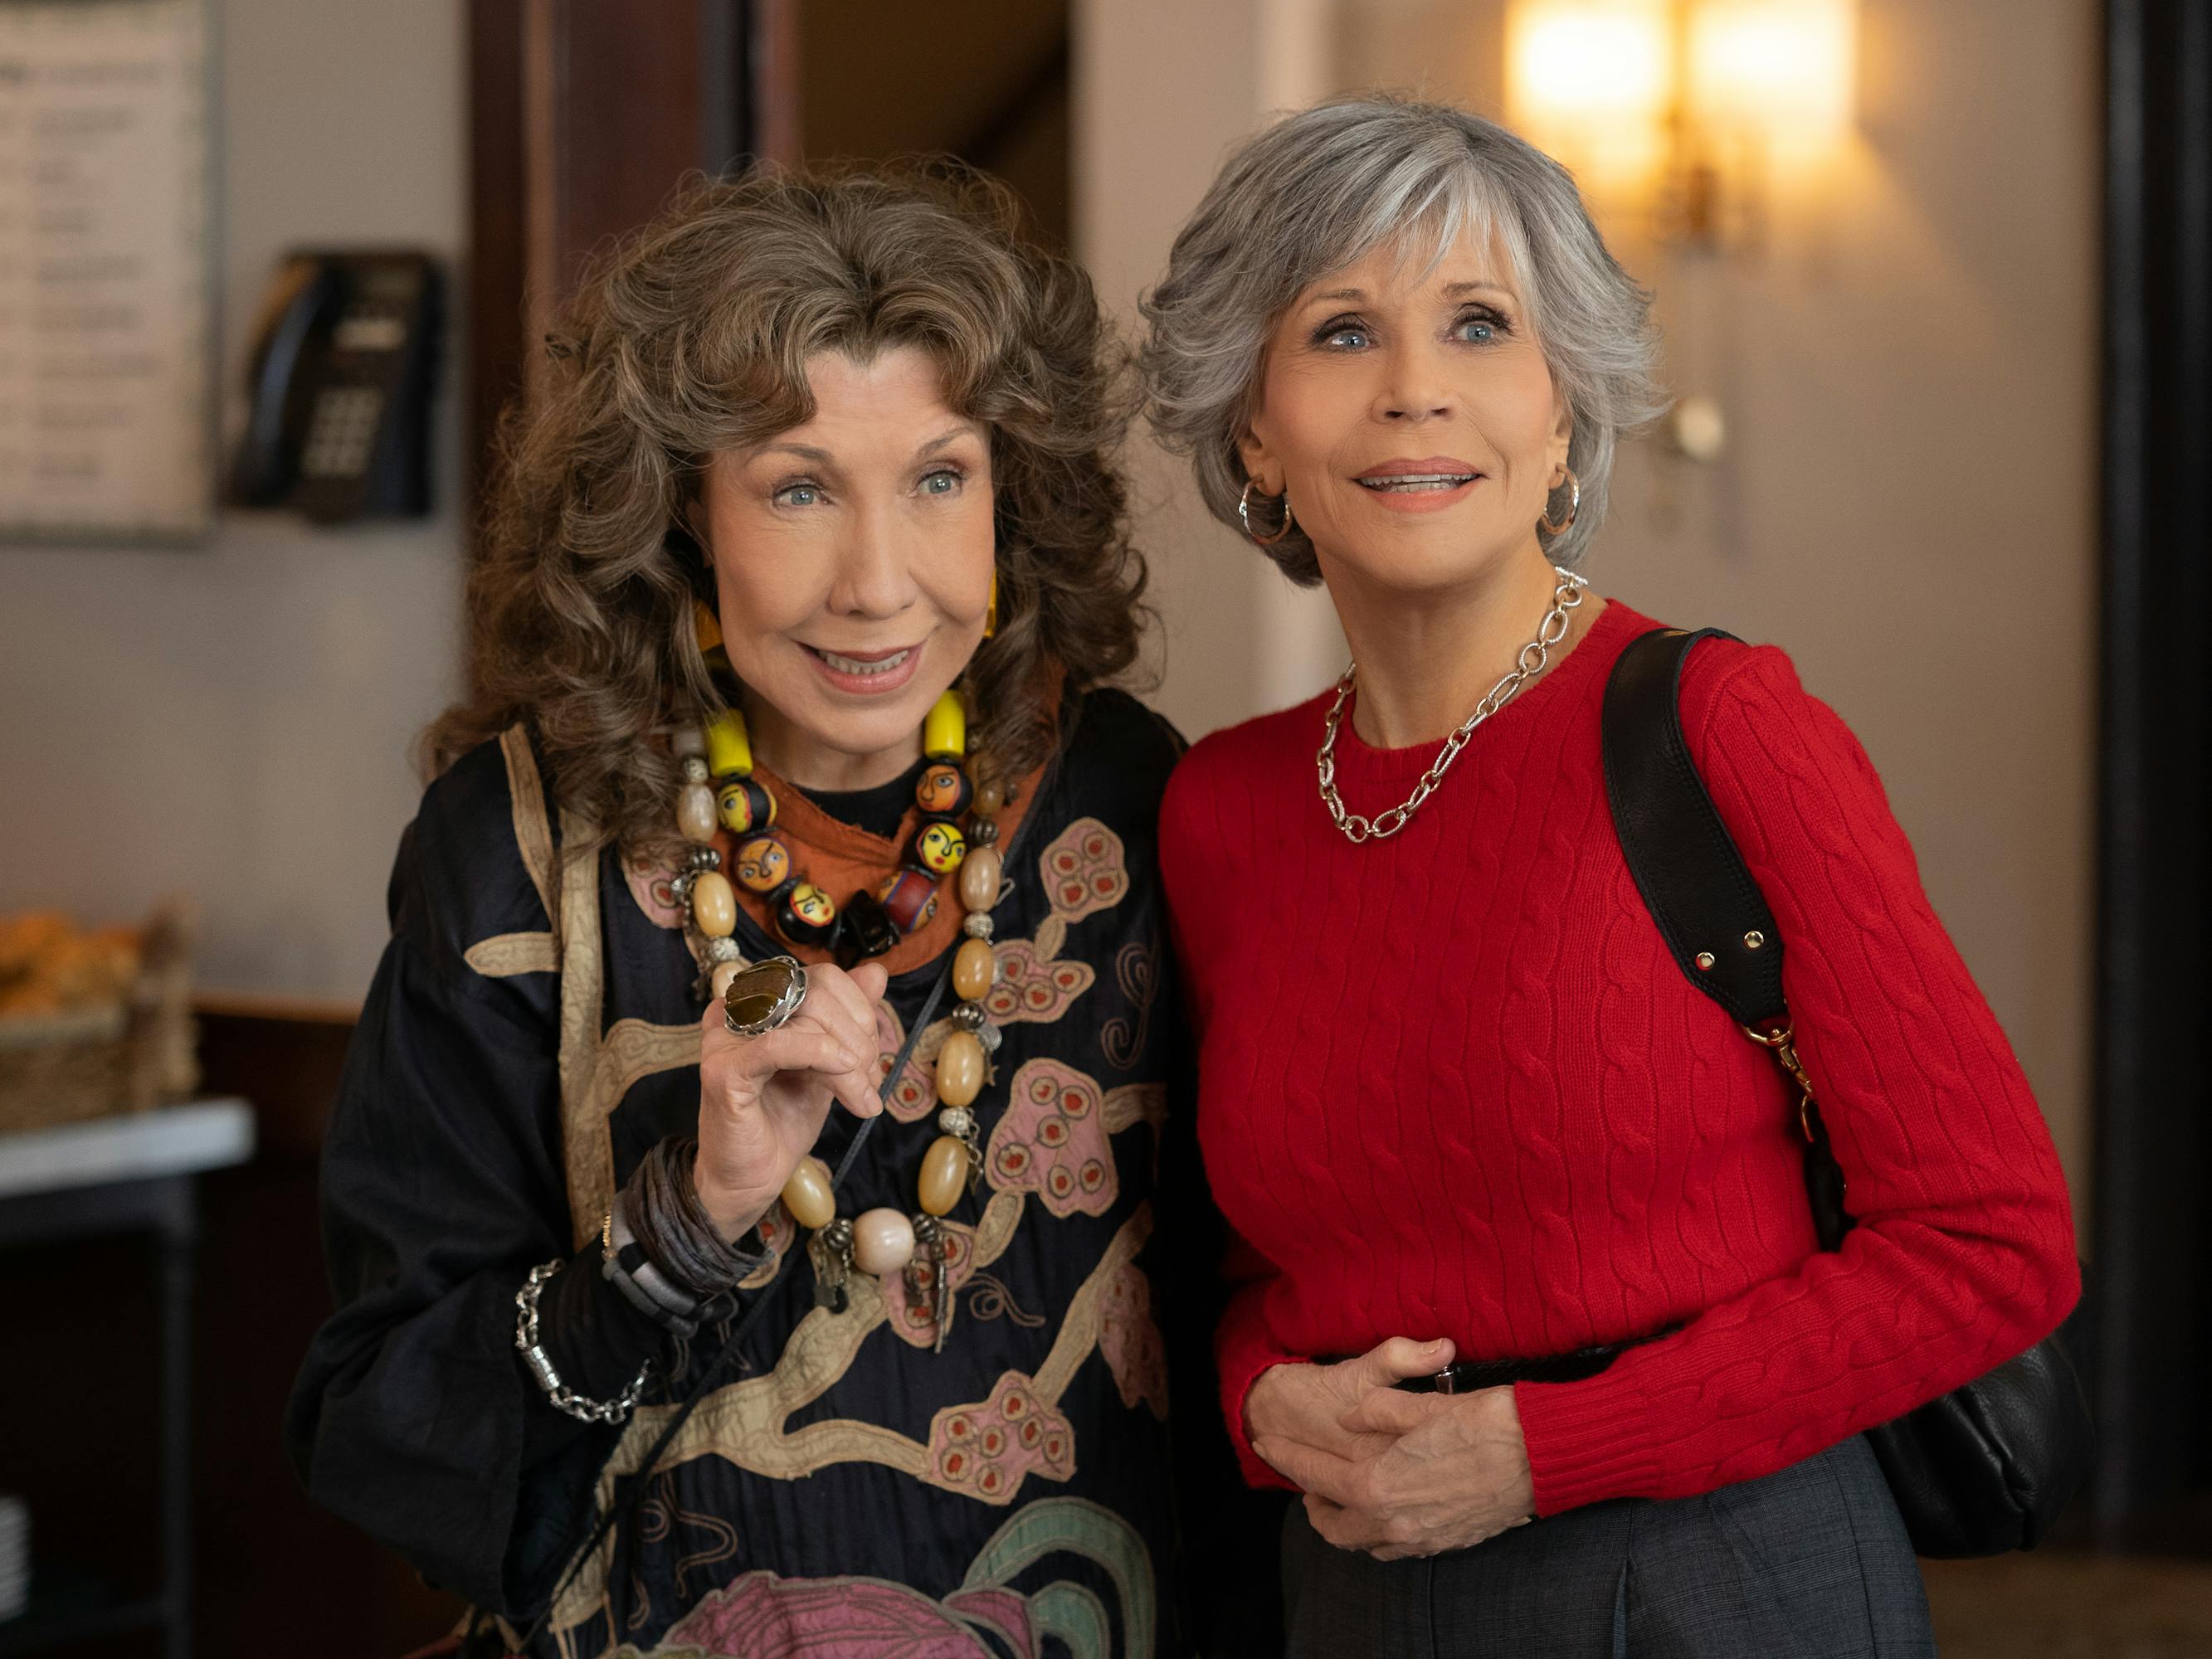 Frankie (Lily Tomlin) and Grace (Jane Fonda) stand close together. Frankie wears her assortment of chunky jewelry. And Grace wears a red sweater.